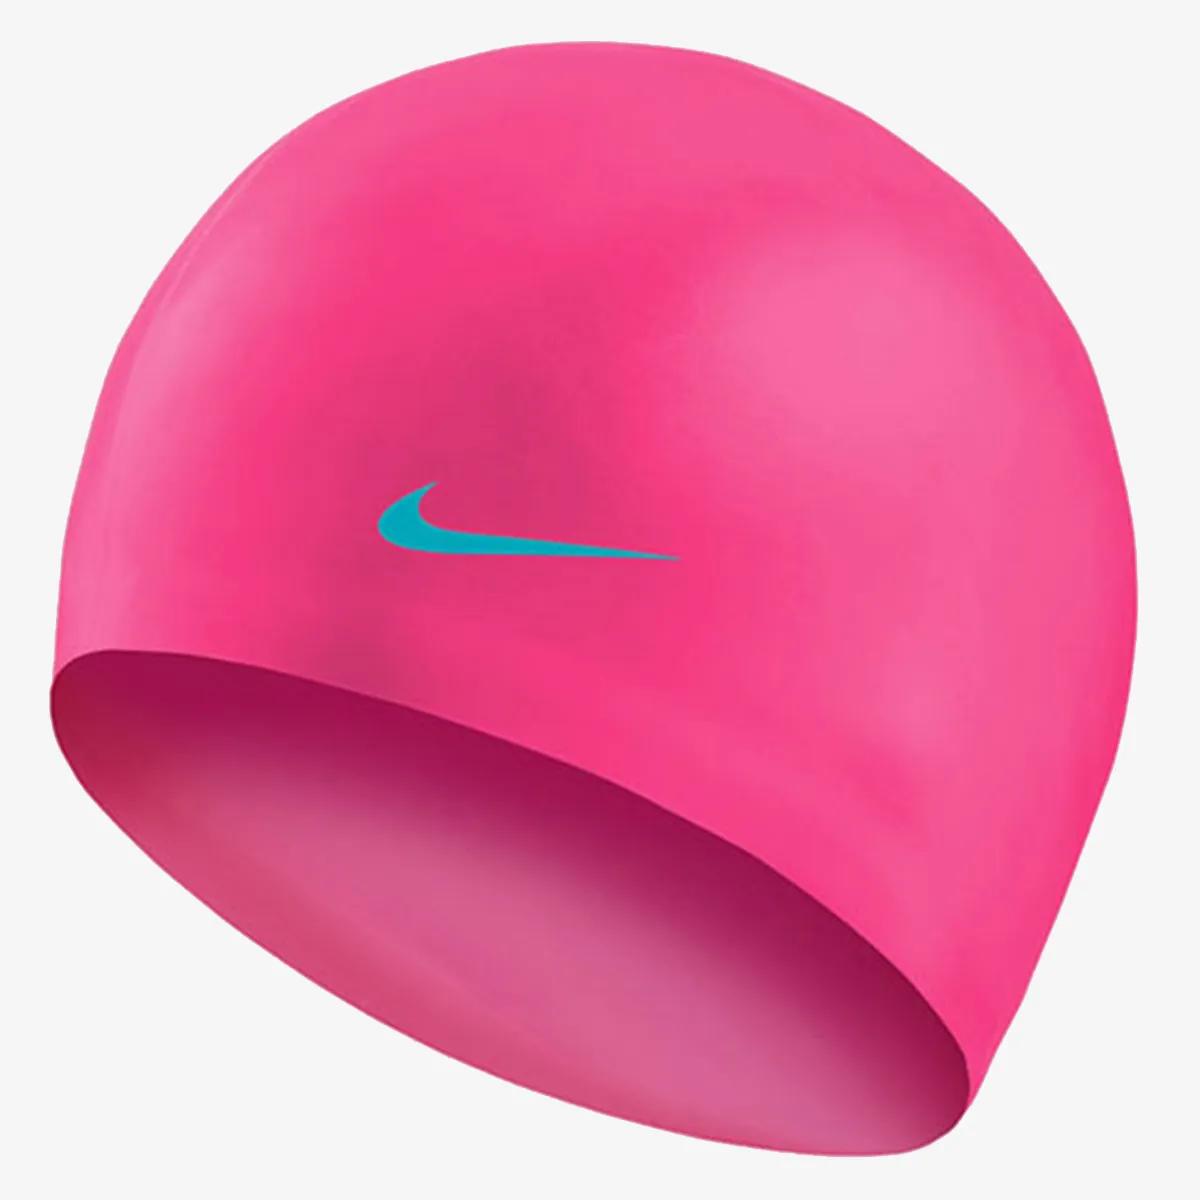 Nike Casca de inot Solid Silicone 